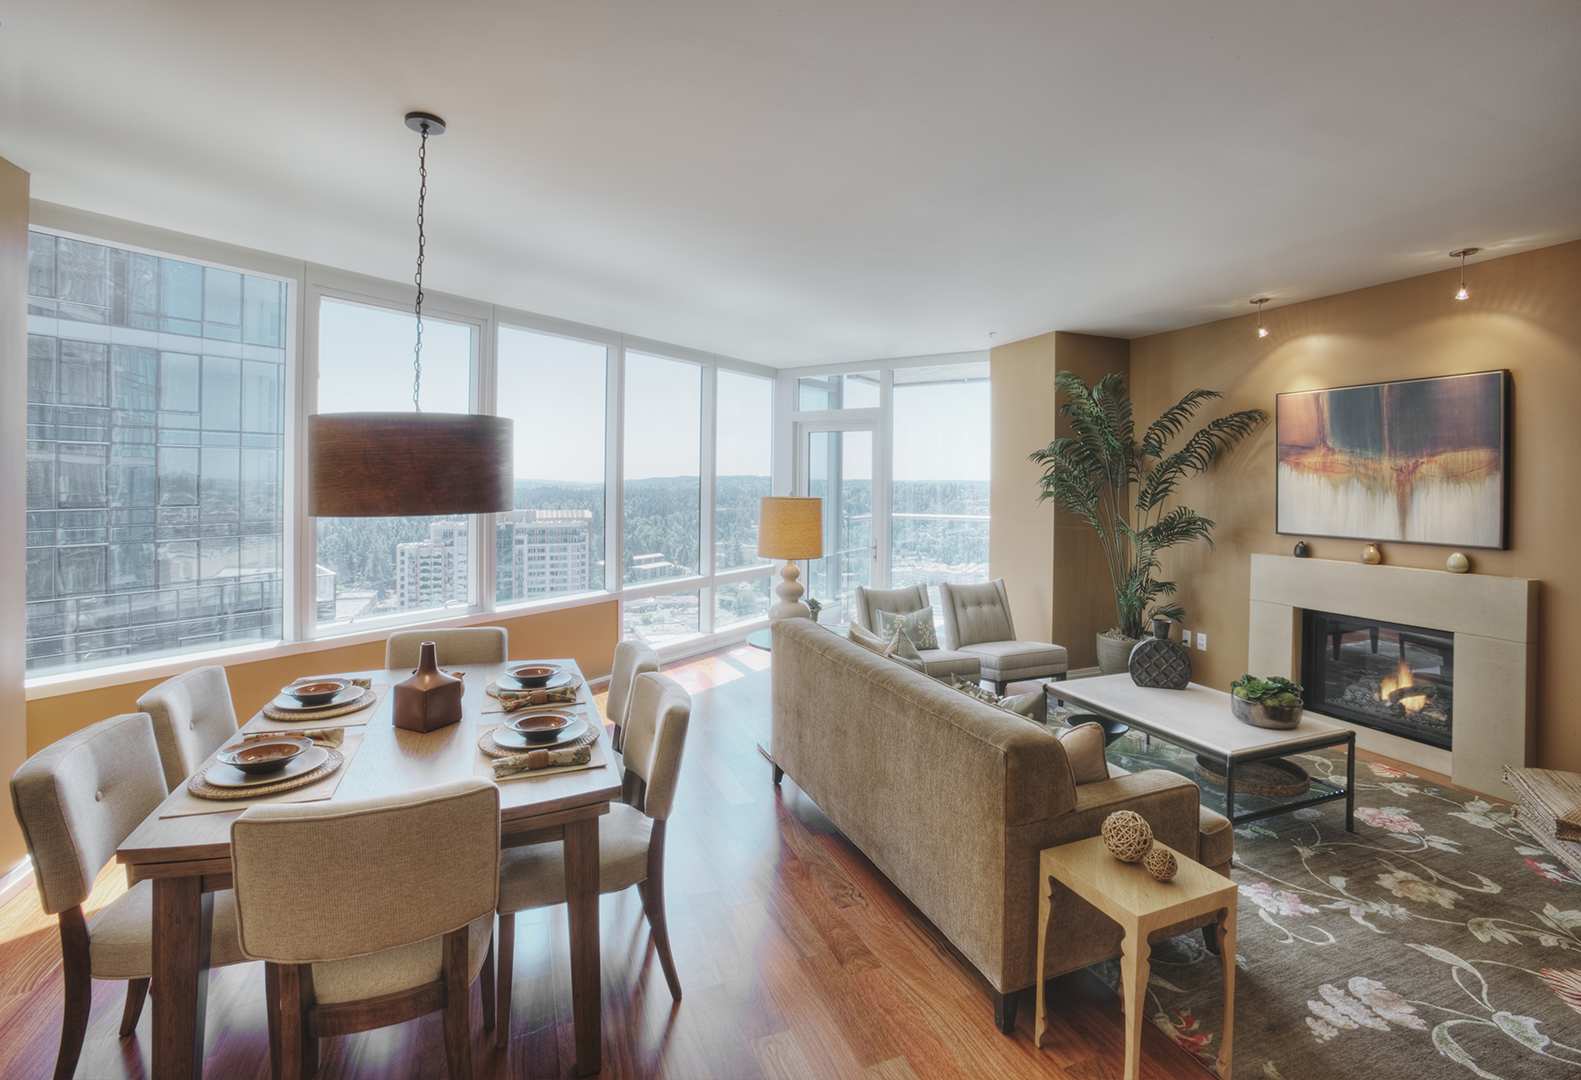 living room and dining room in luxury highrise apa 2022 03 04 02 20 56 utc